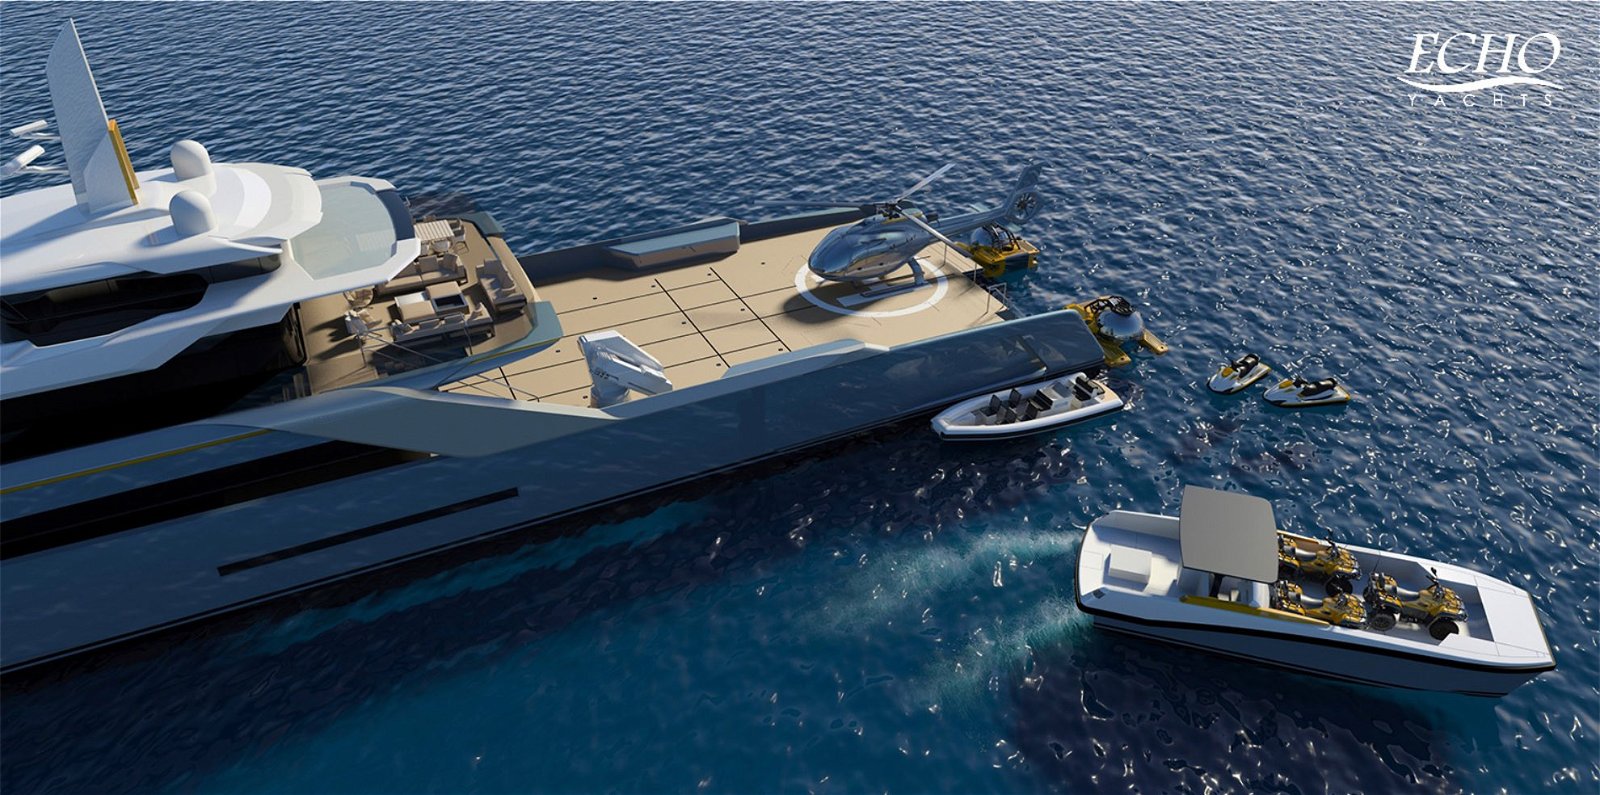 4 - Project Echo by Echo Yachts